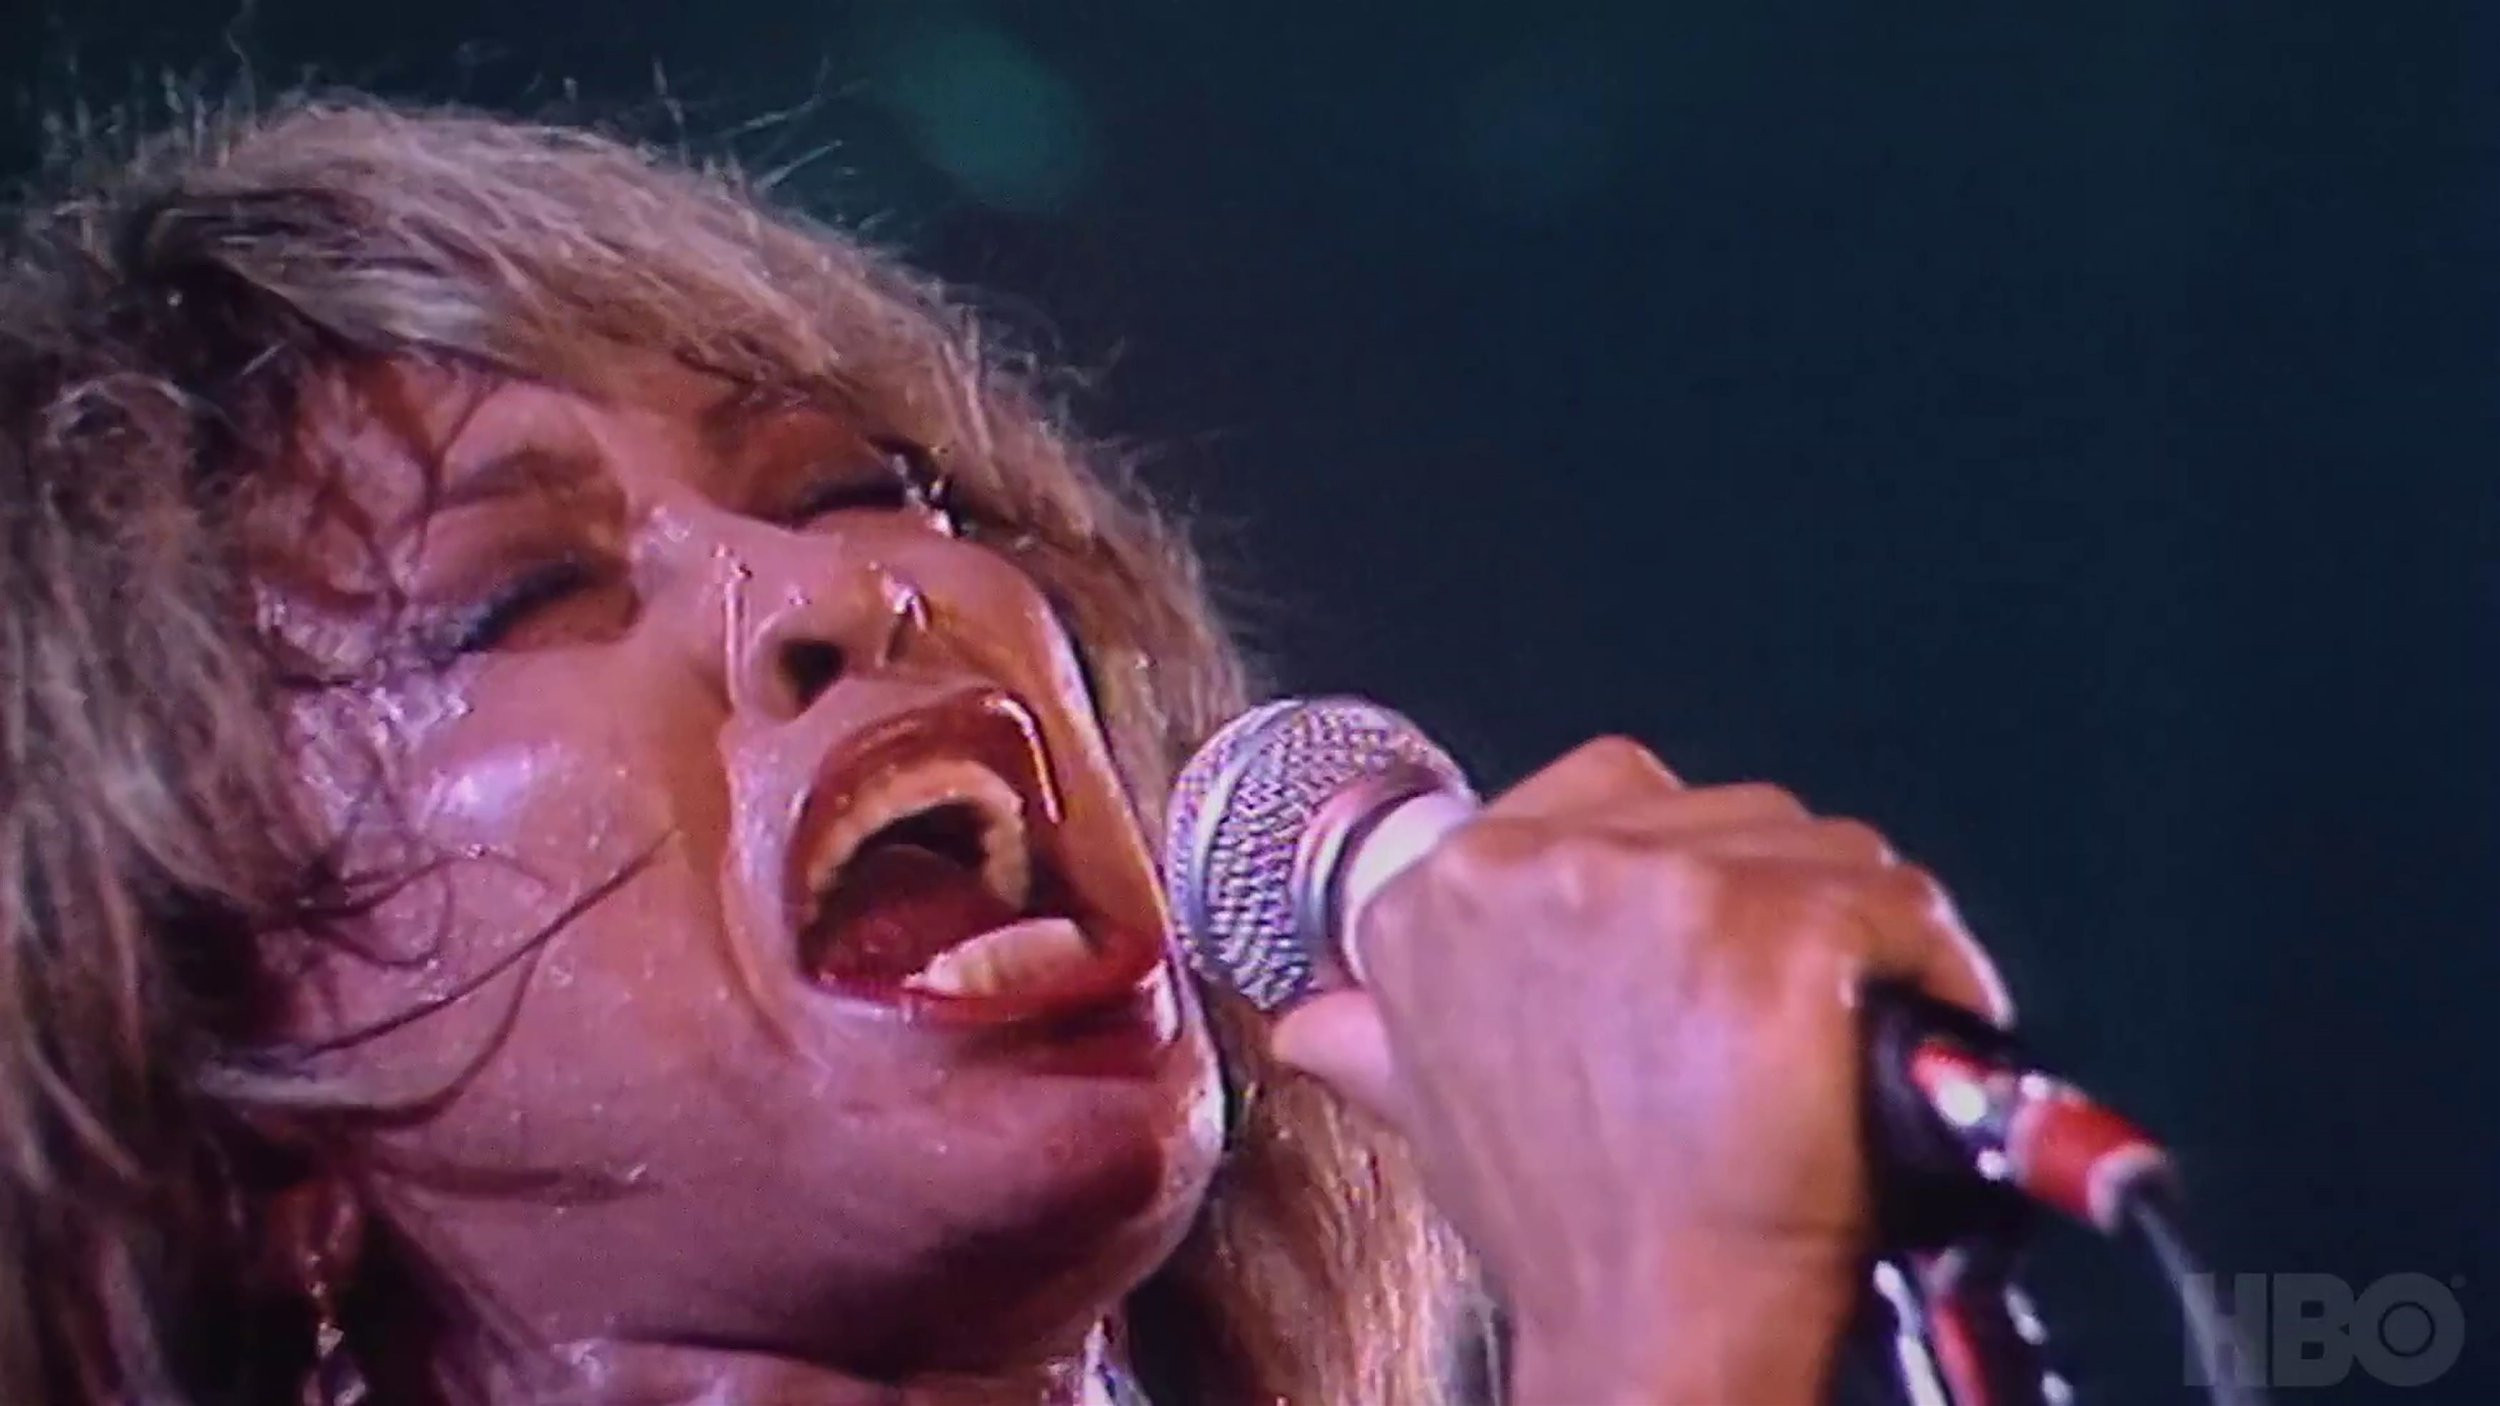 Tina Turner no longer wants to revisit painful memories for her fans: ‘It can be extremely traumatizing’